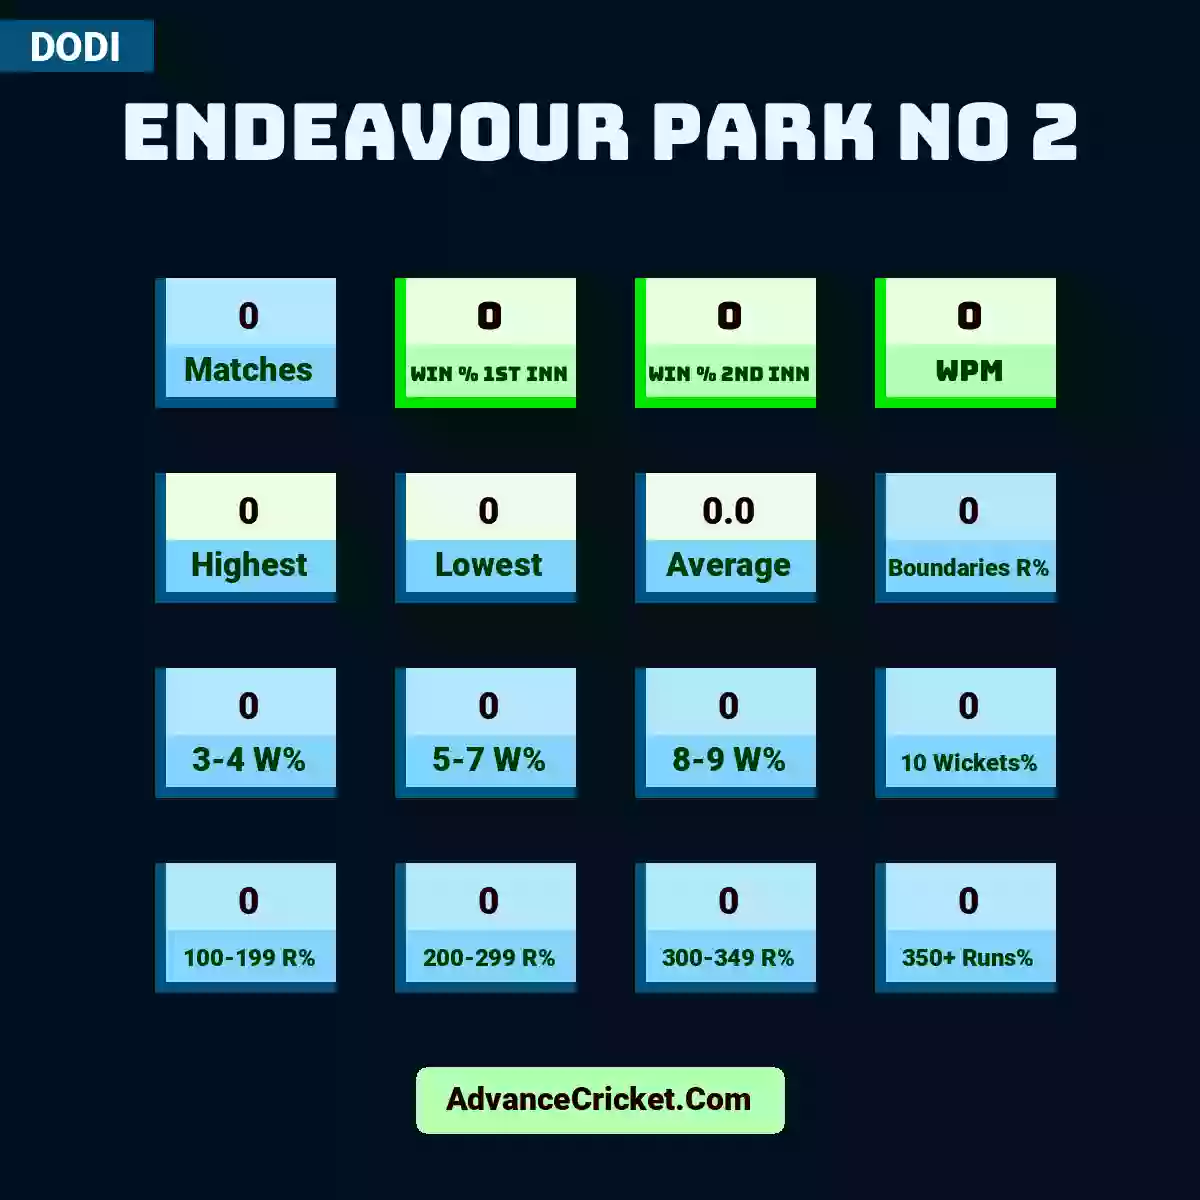 Image showing Endeavour Park No 2 with Matches: 0, Win % 1st Inn: 0, Win % 2nd Inn: 0, WPM: 0, Highest: 0, Lowest: 0, Average: 0.0, Boundaries R%: 0, 3-4 W%: 0, 5-7 W%: 0, 8-9 W%: 0, 10 Wickets%: 0, 100-199 R%: 0, 200-299 R%: 0, 300-349 R%: 0, 350+ Runs%: 0.